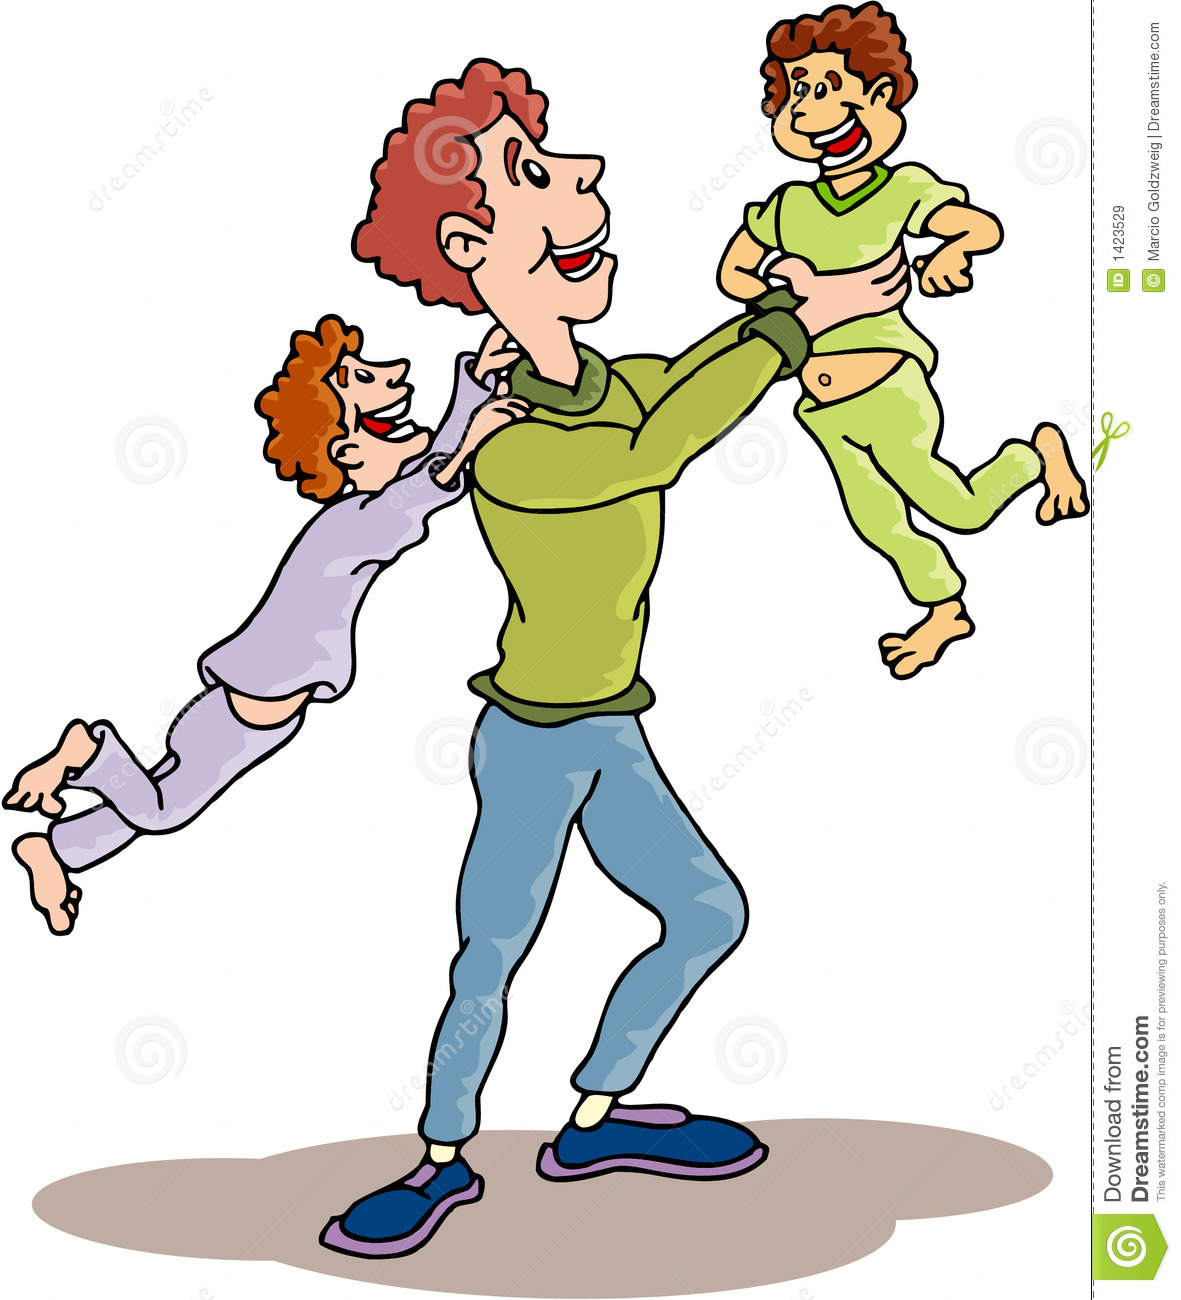 uncle clipart family